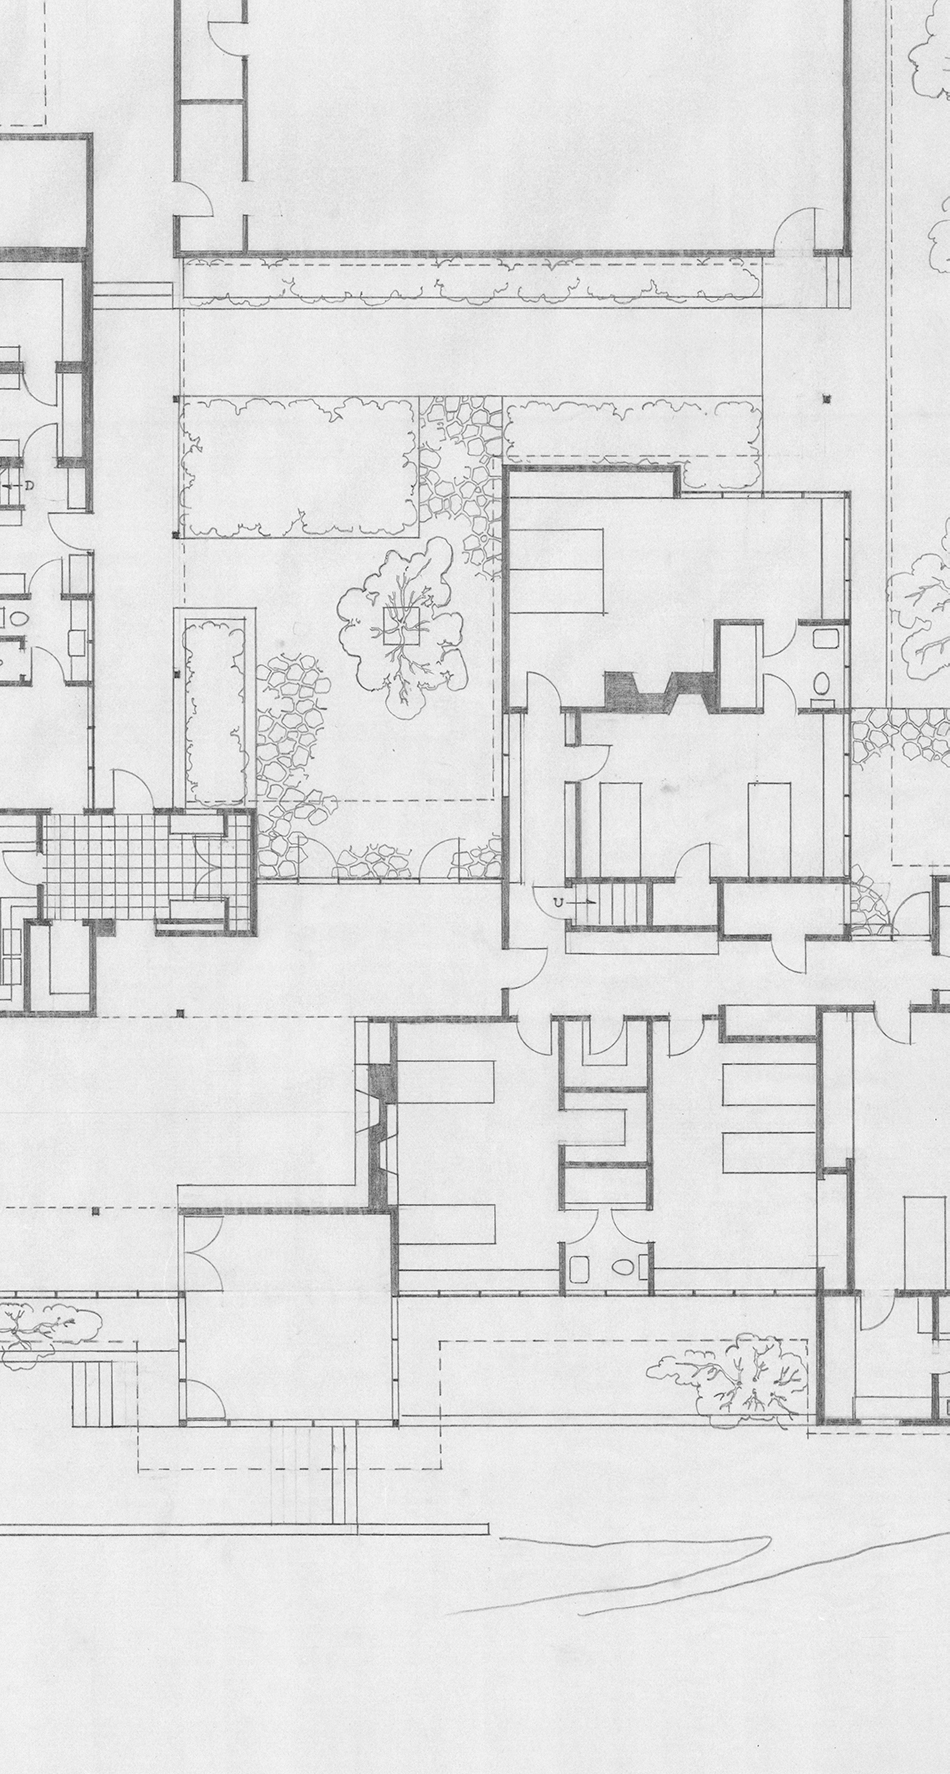 House and Garden Plan, John Yeon architectural drawings, 1934-1976